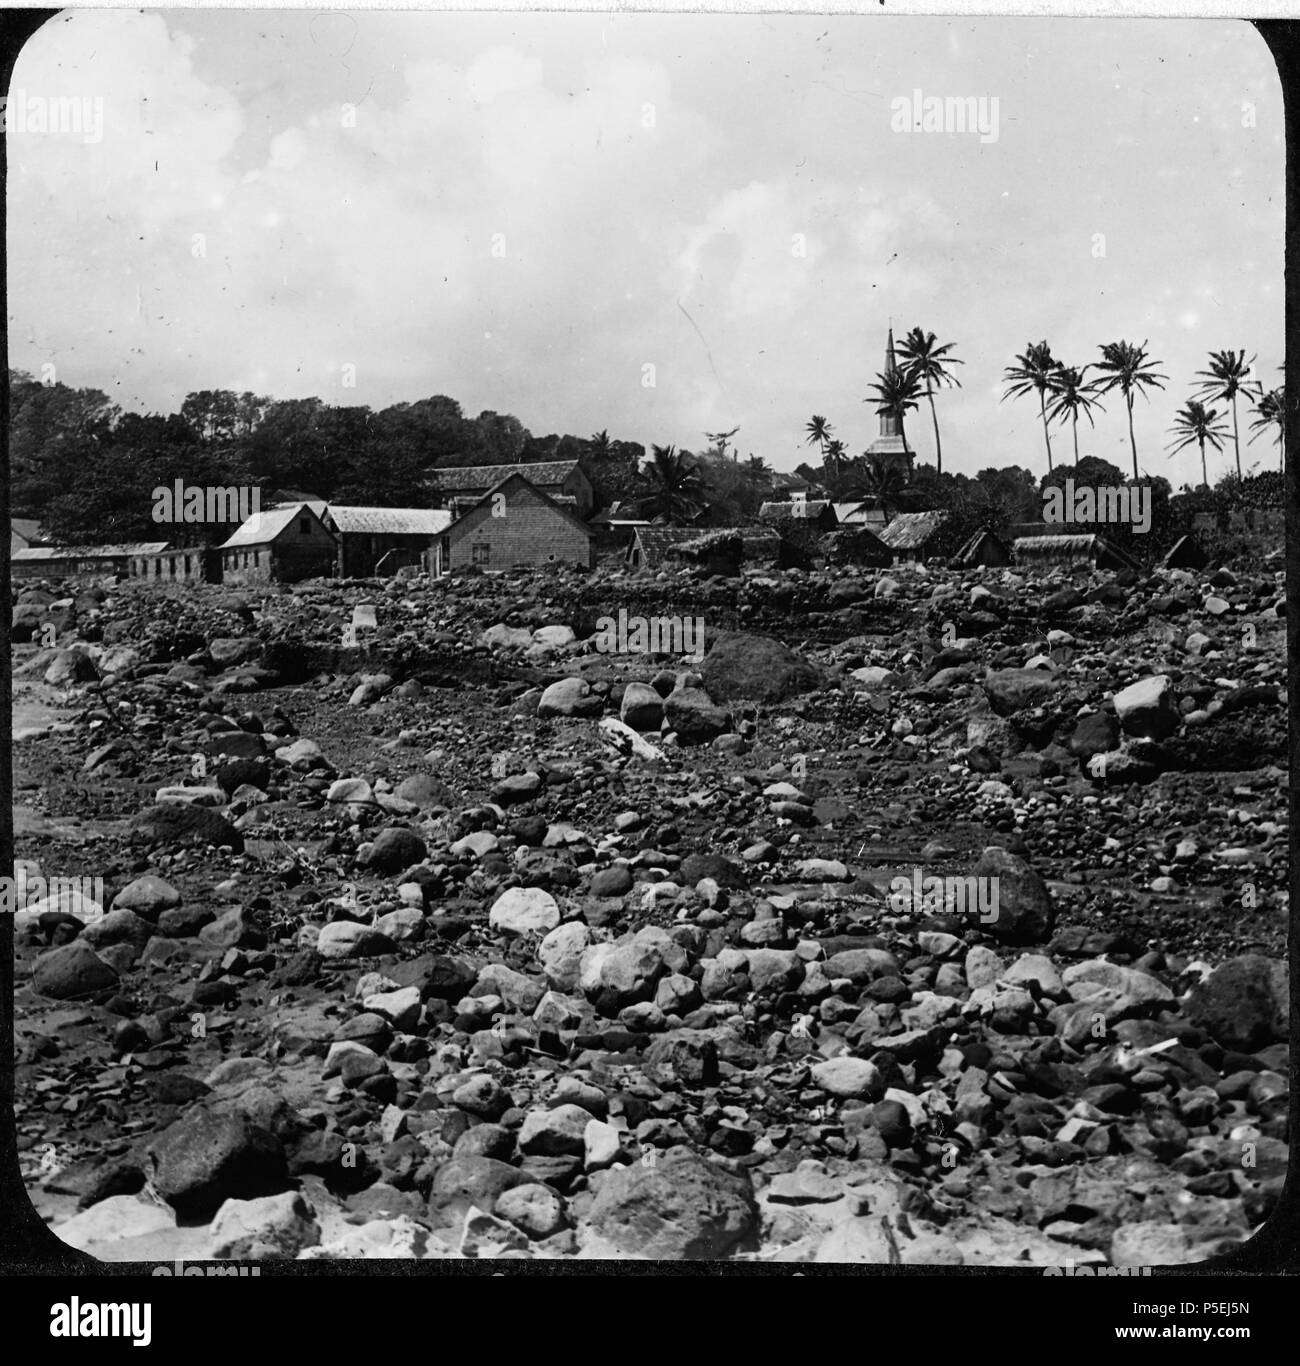 Basse Pointe. One slide and one negative. The new delta at Basse Pointe - blocks transported by torrrential rain. 'This delta was formed in a few hours as rains associated with the 1902 eruptions swept down large quantities of large debris. Village in background - wooden houses, some with thatched roofs, and church with spire. Palm trees.. 1907. N/A 175 Basse Pointe YORYM-TA0306 Stock Photo